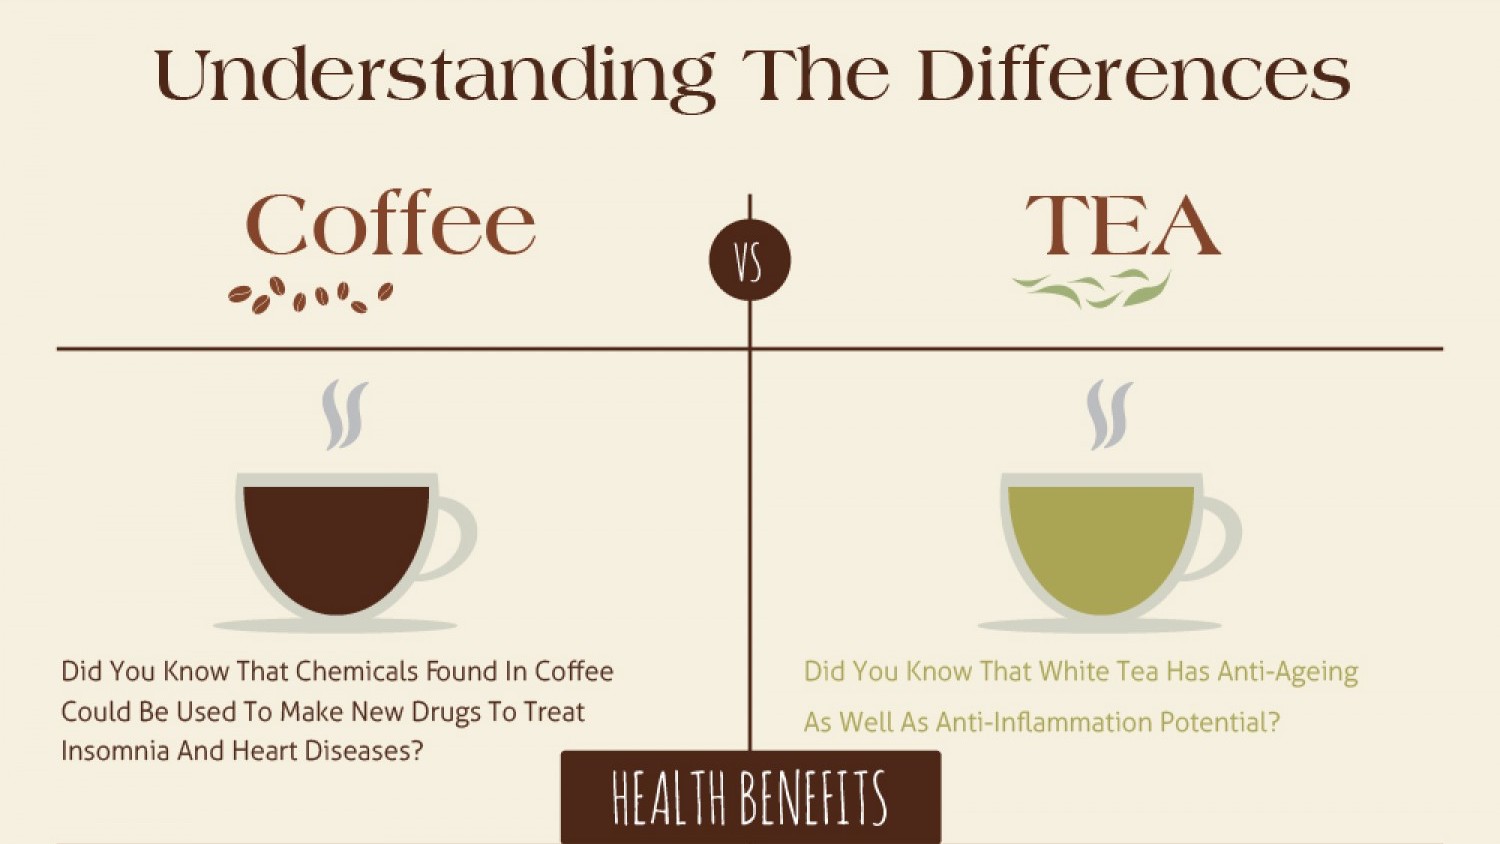 Is Green Tea Better Or Coffee? A Comparison (Infographic